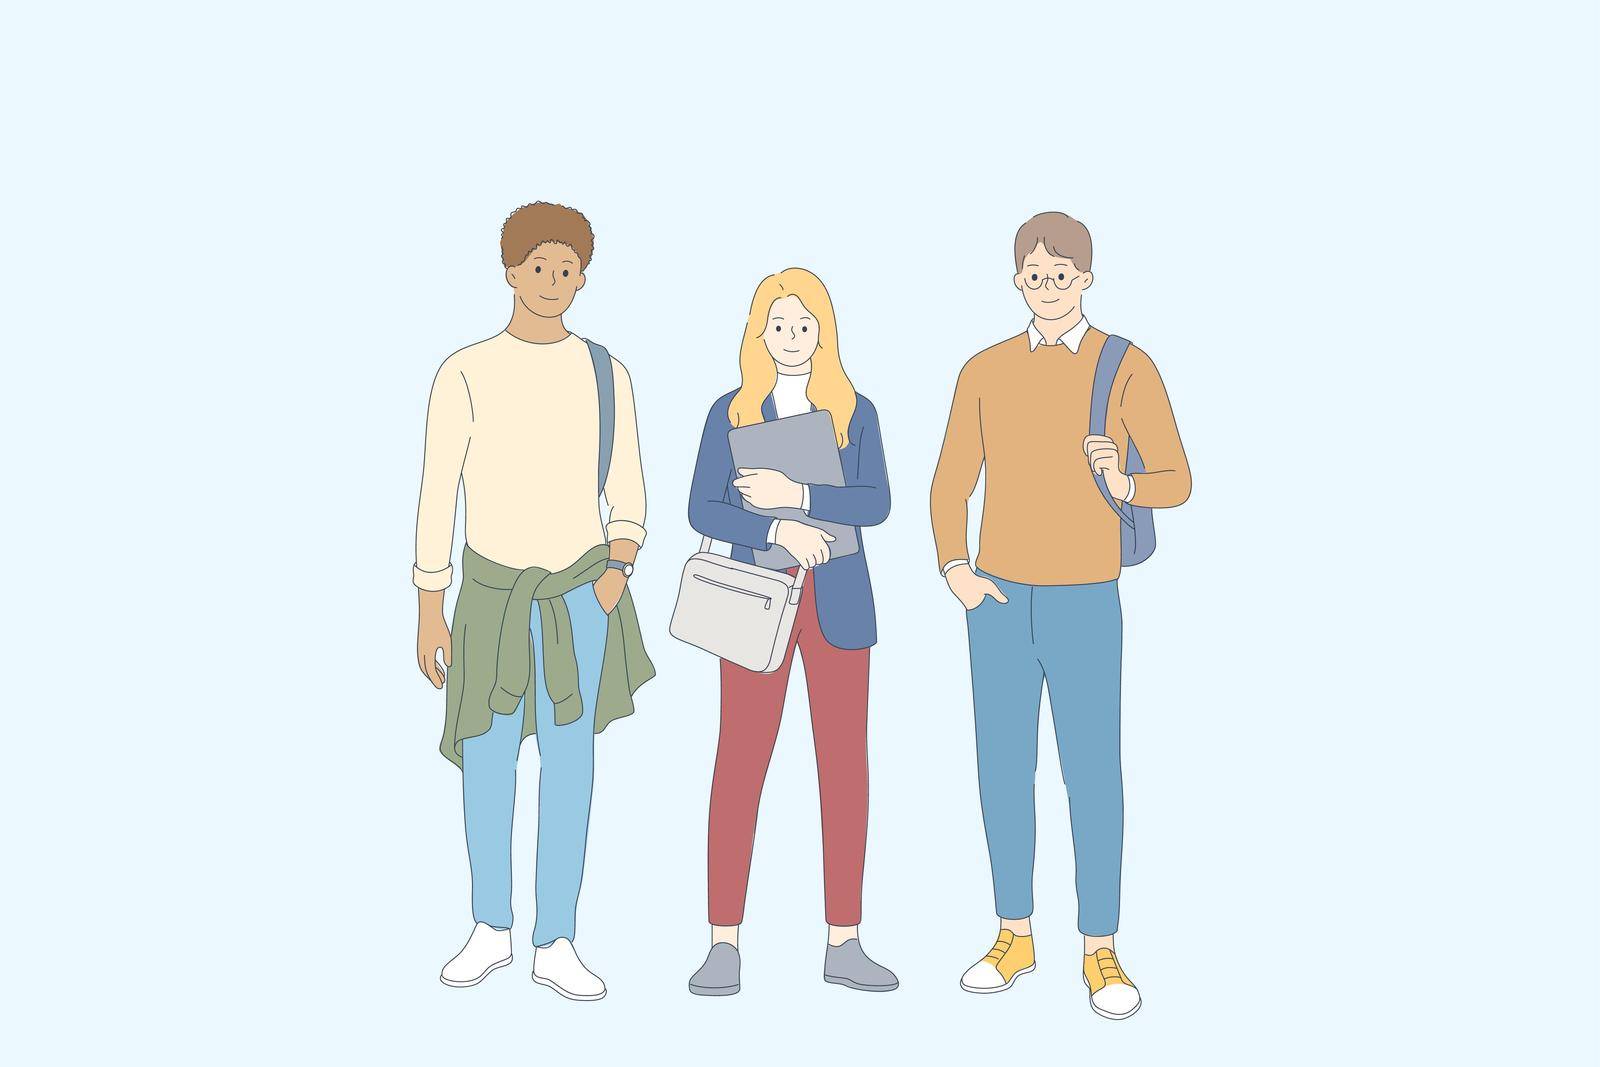 Students and friendship concept. Young smiling teen people students classmates cartoon characters standing with backpacks and books together after lessons outdoors vector illustration